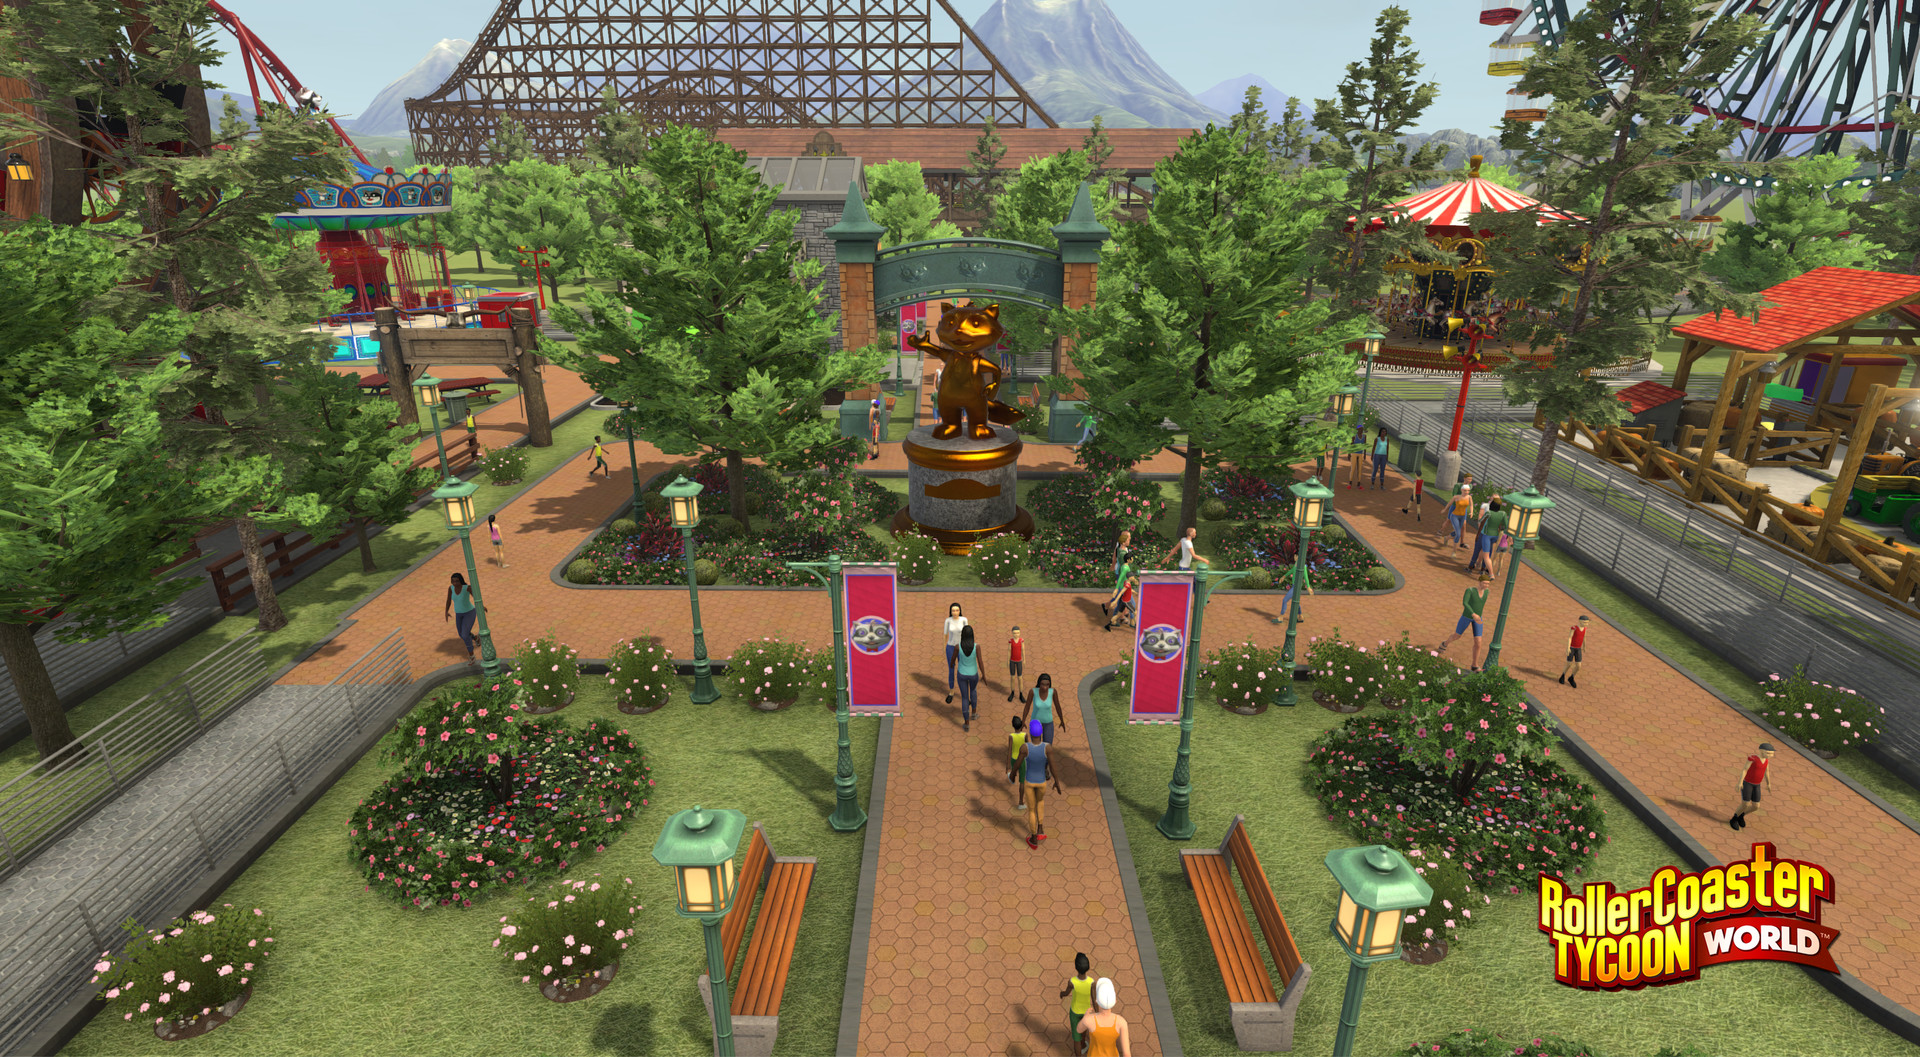 Download RollerCoaster Tycoon World Full PC Game